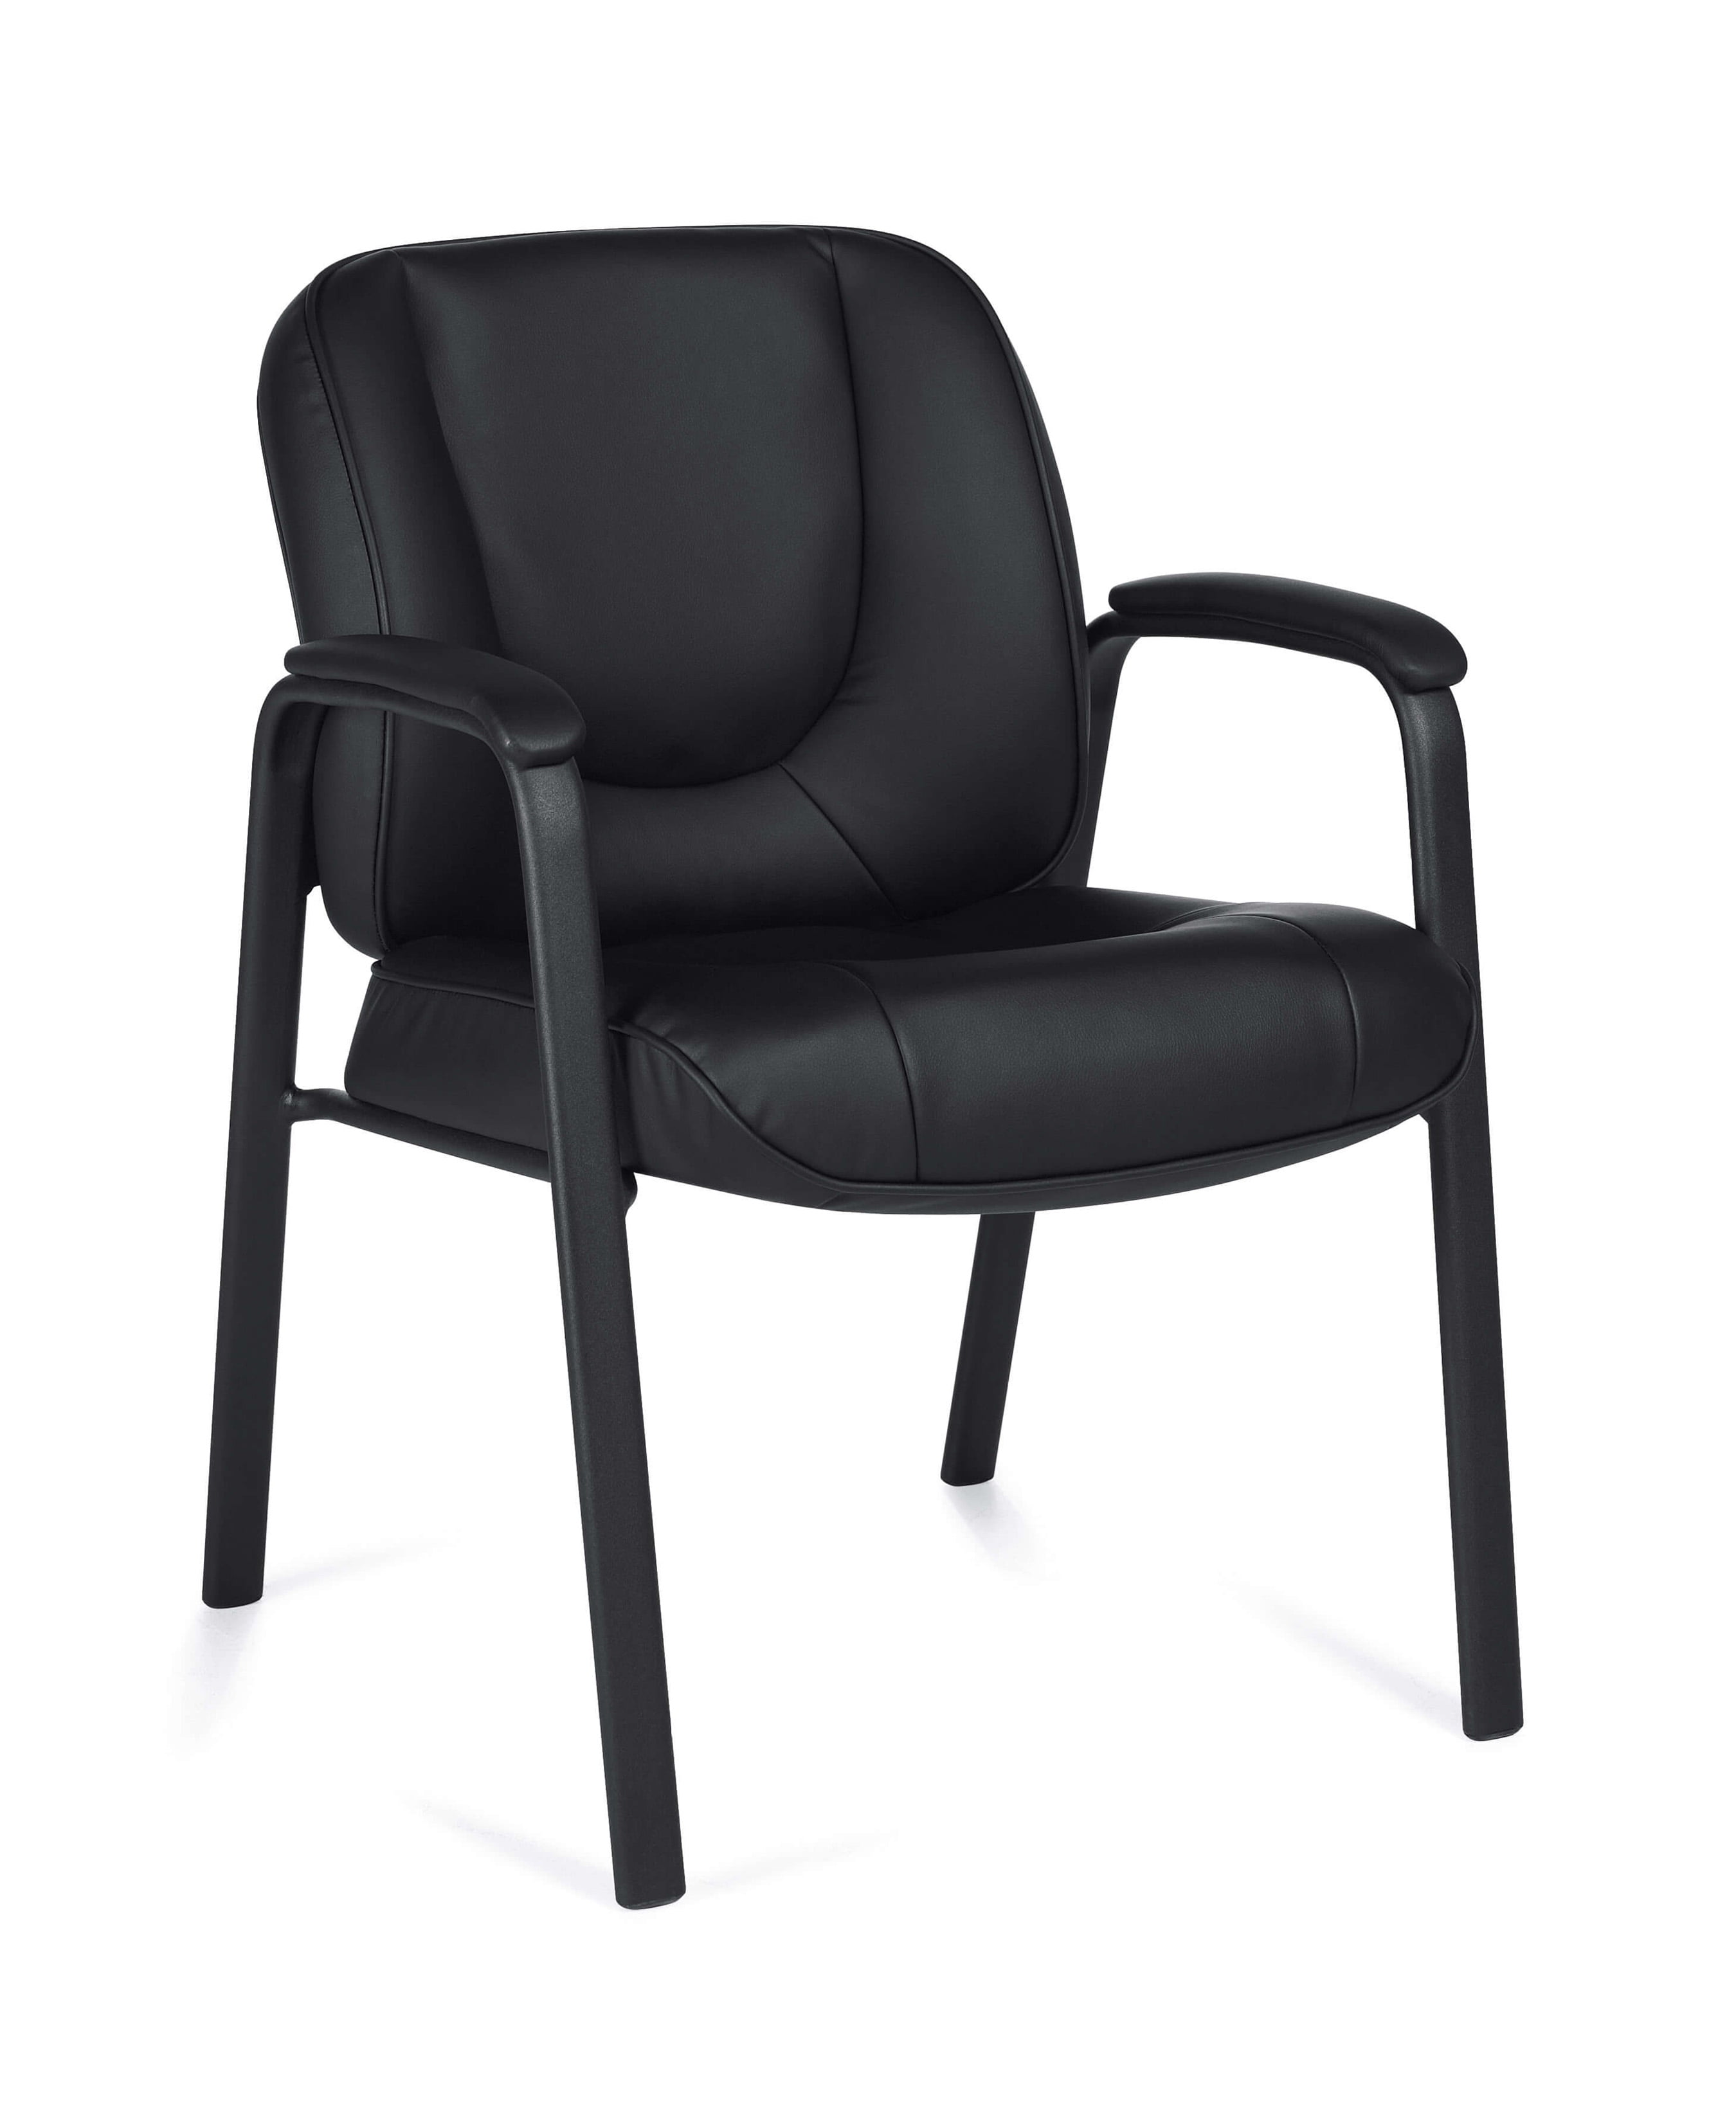 Details about   Waiting Room Chairs Black 